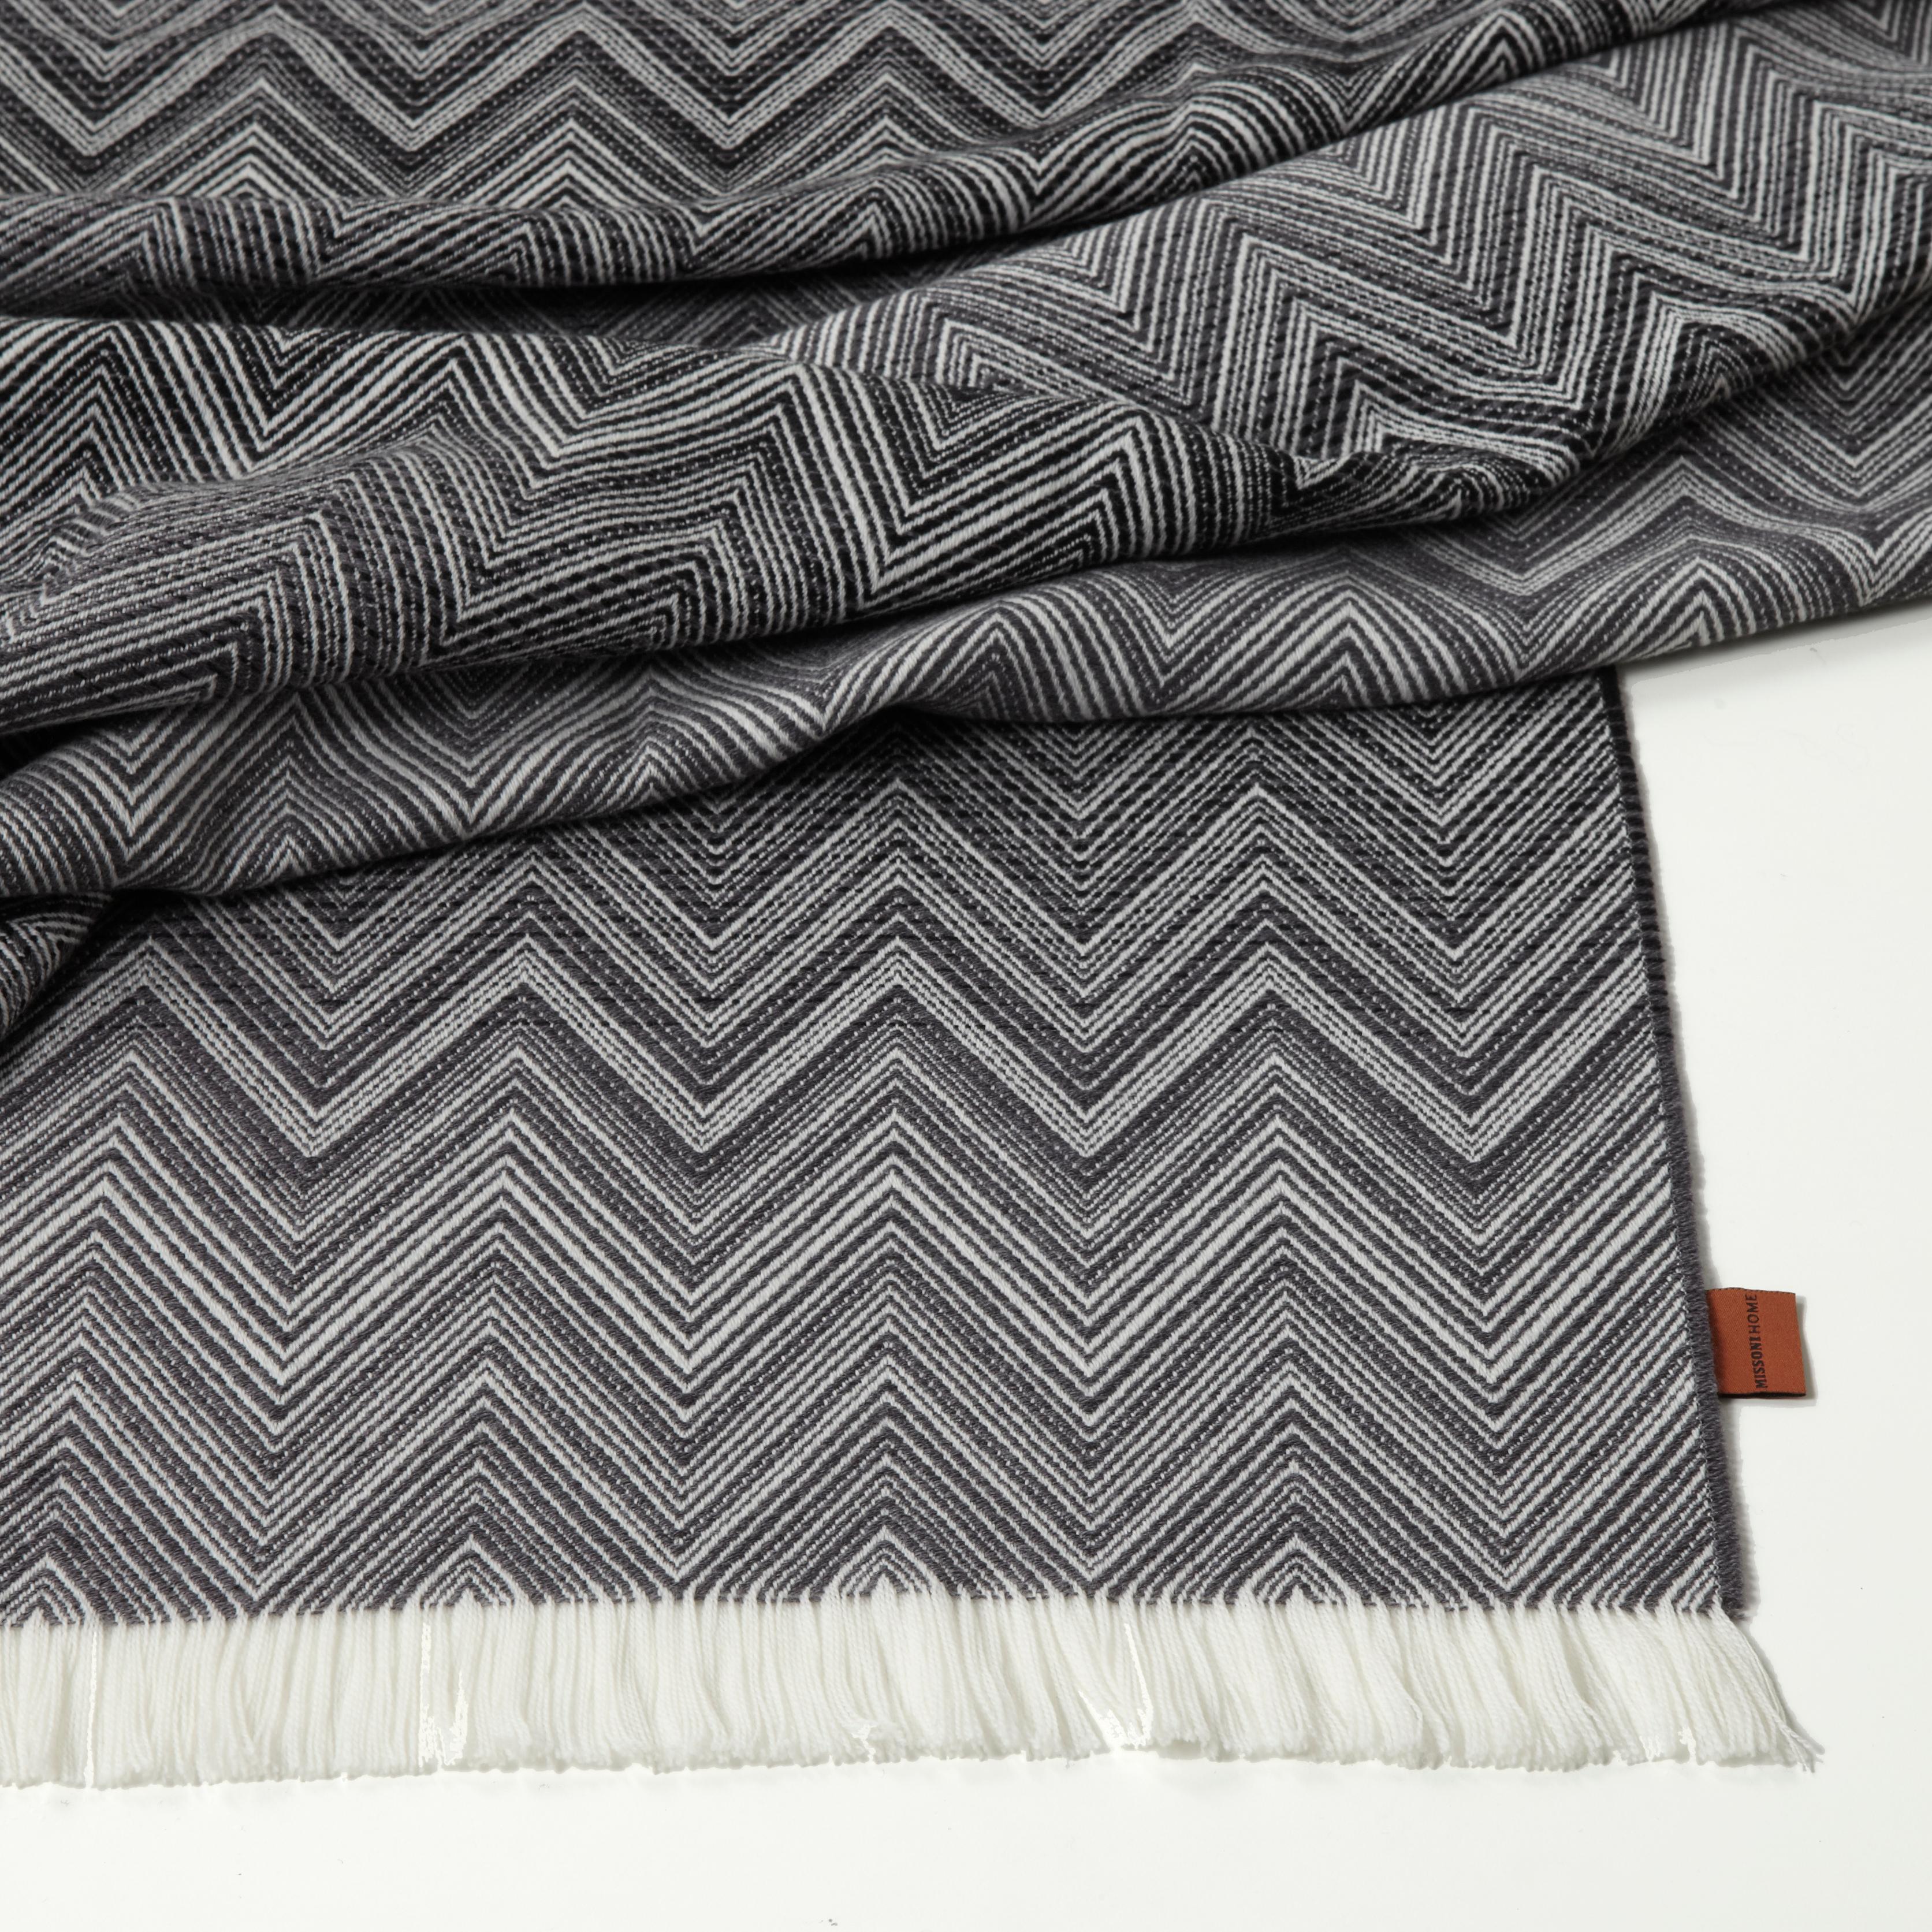 Missoni Home iconic chevron throw with a tonal ombre design. All Missoni Home products are custom made to order with the highest quality materials. Perfect for adding an elegant touch to any bedroom or living room.

Composition: 100% Wool. Care: